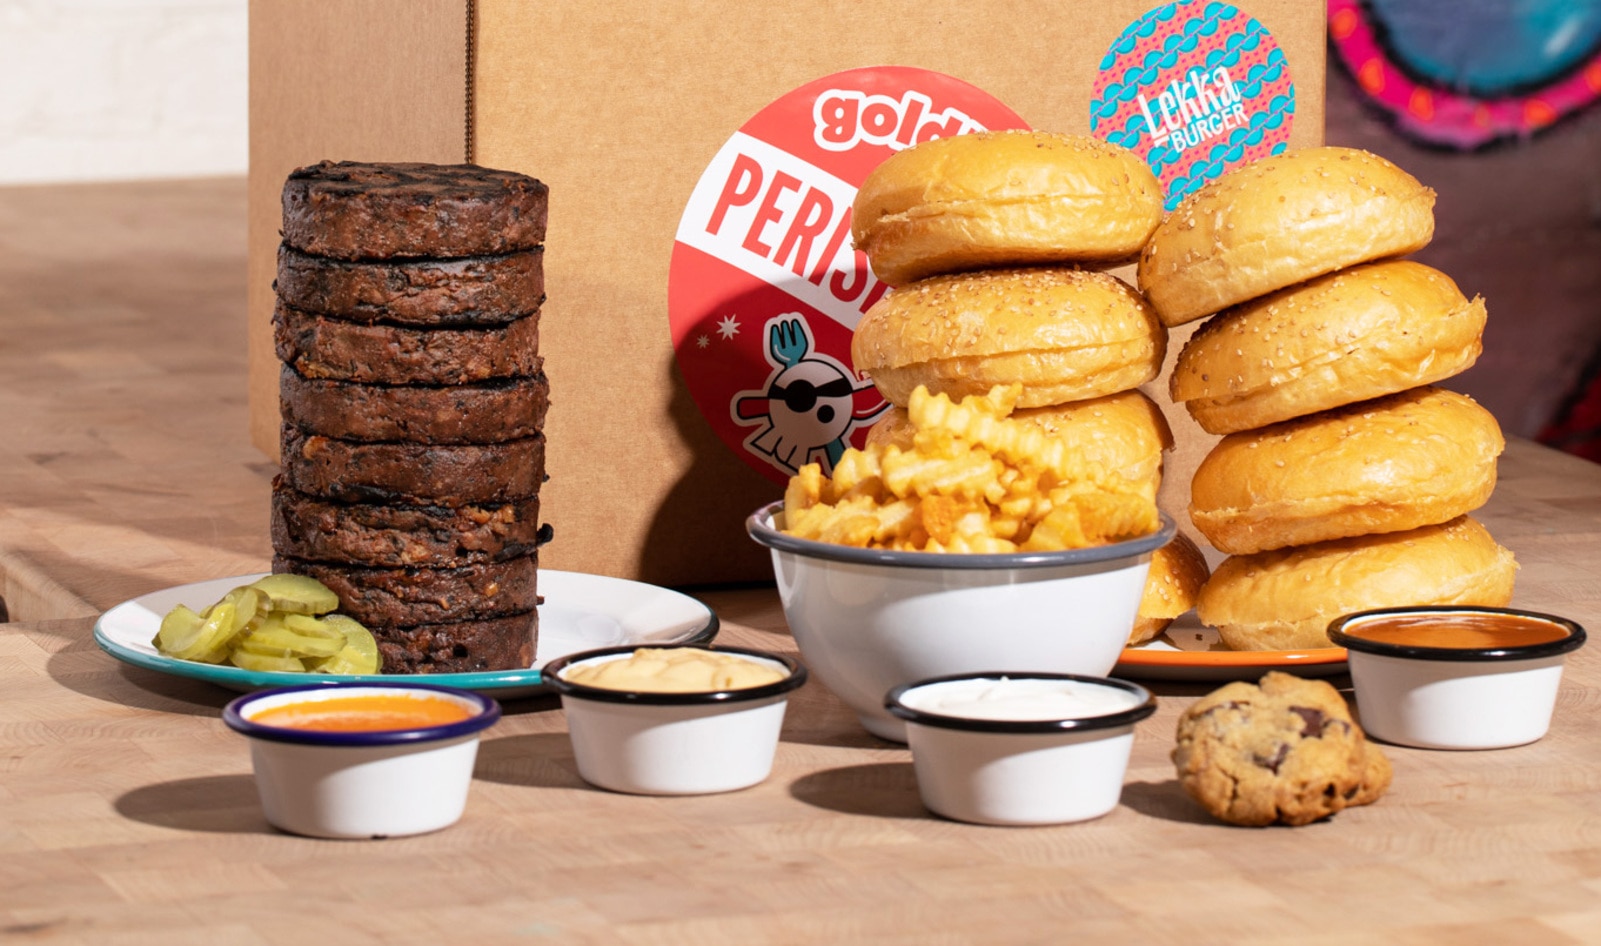 NYC’s Vegan Lekka Burger Is Now Available for Nationwide Delivery